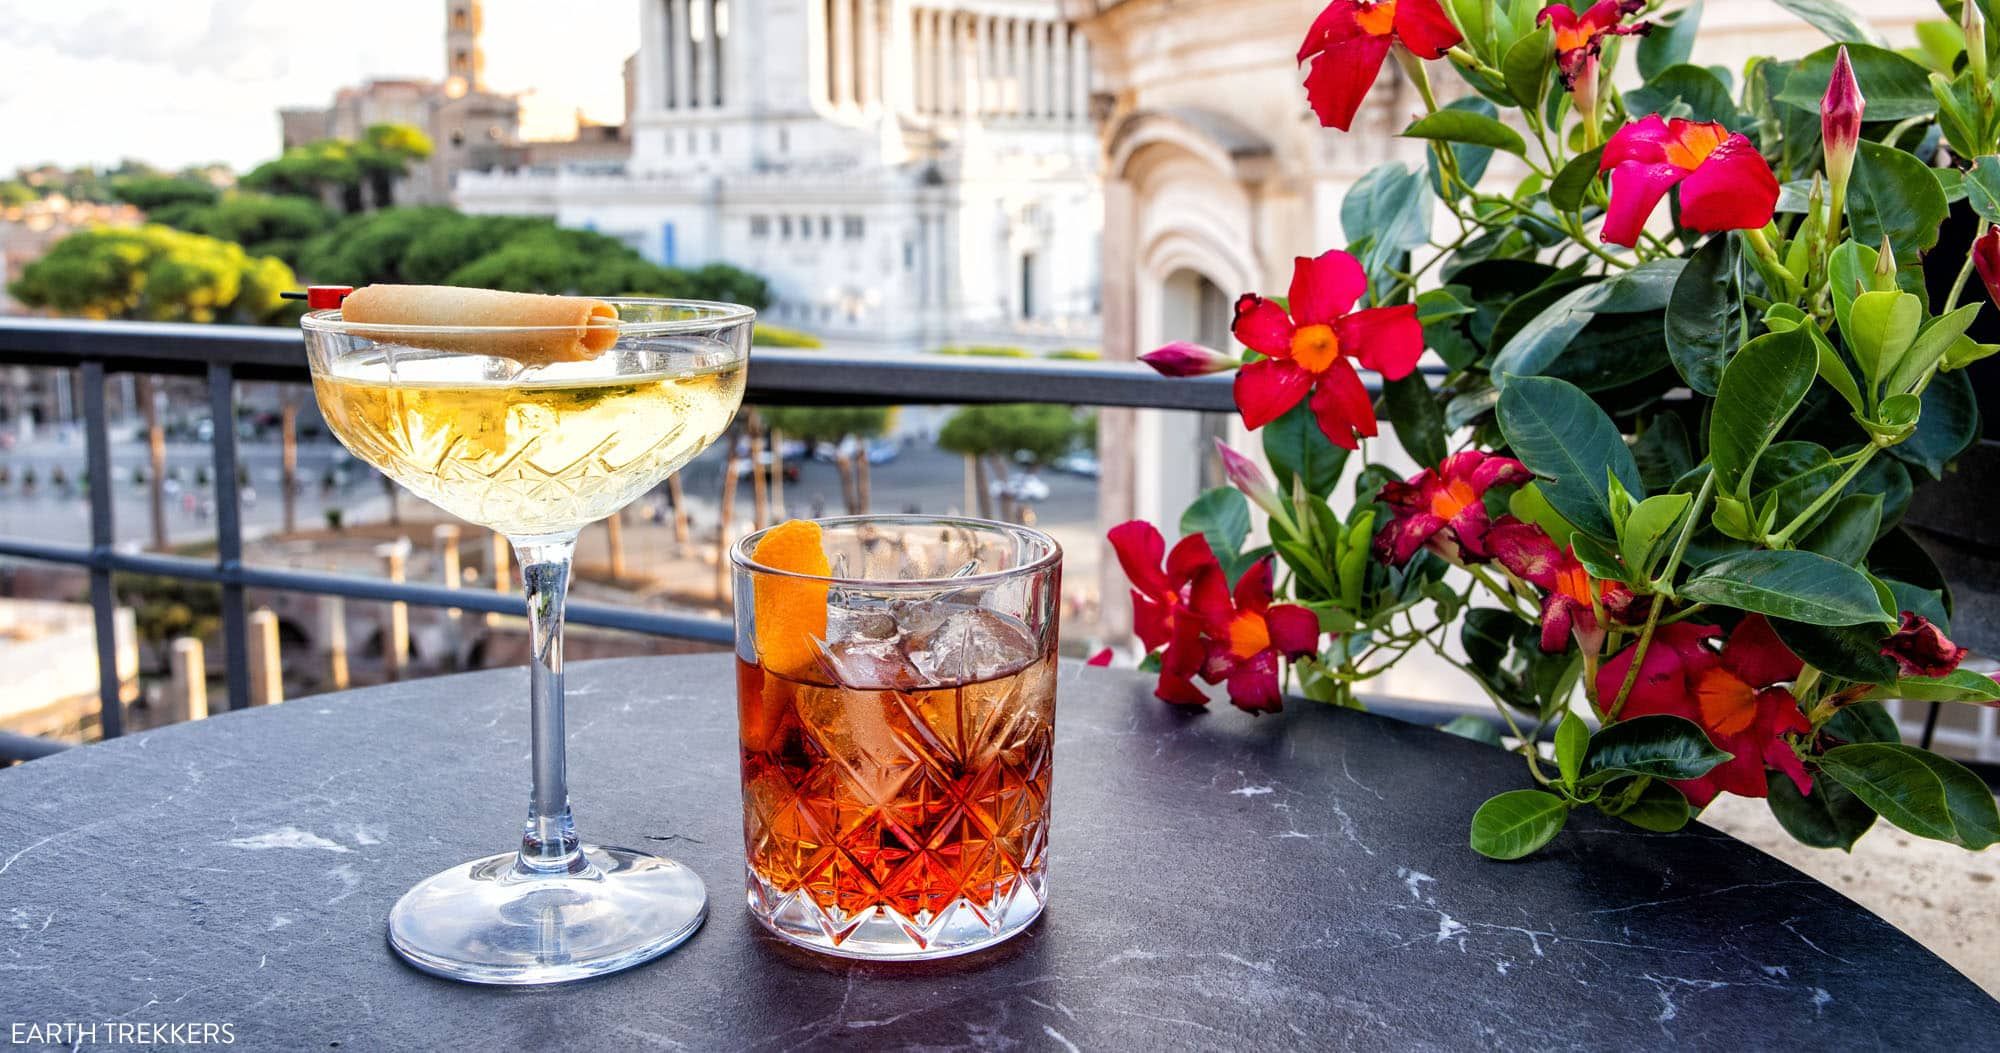 Featured image for “8 Best Rooftop Bars in Rome (Plus Practical Tips & Photos)”